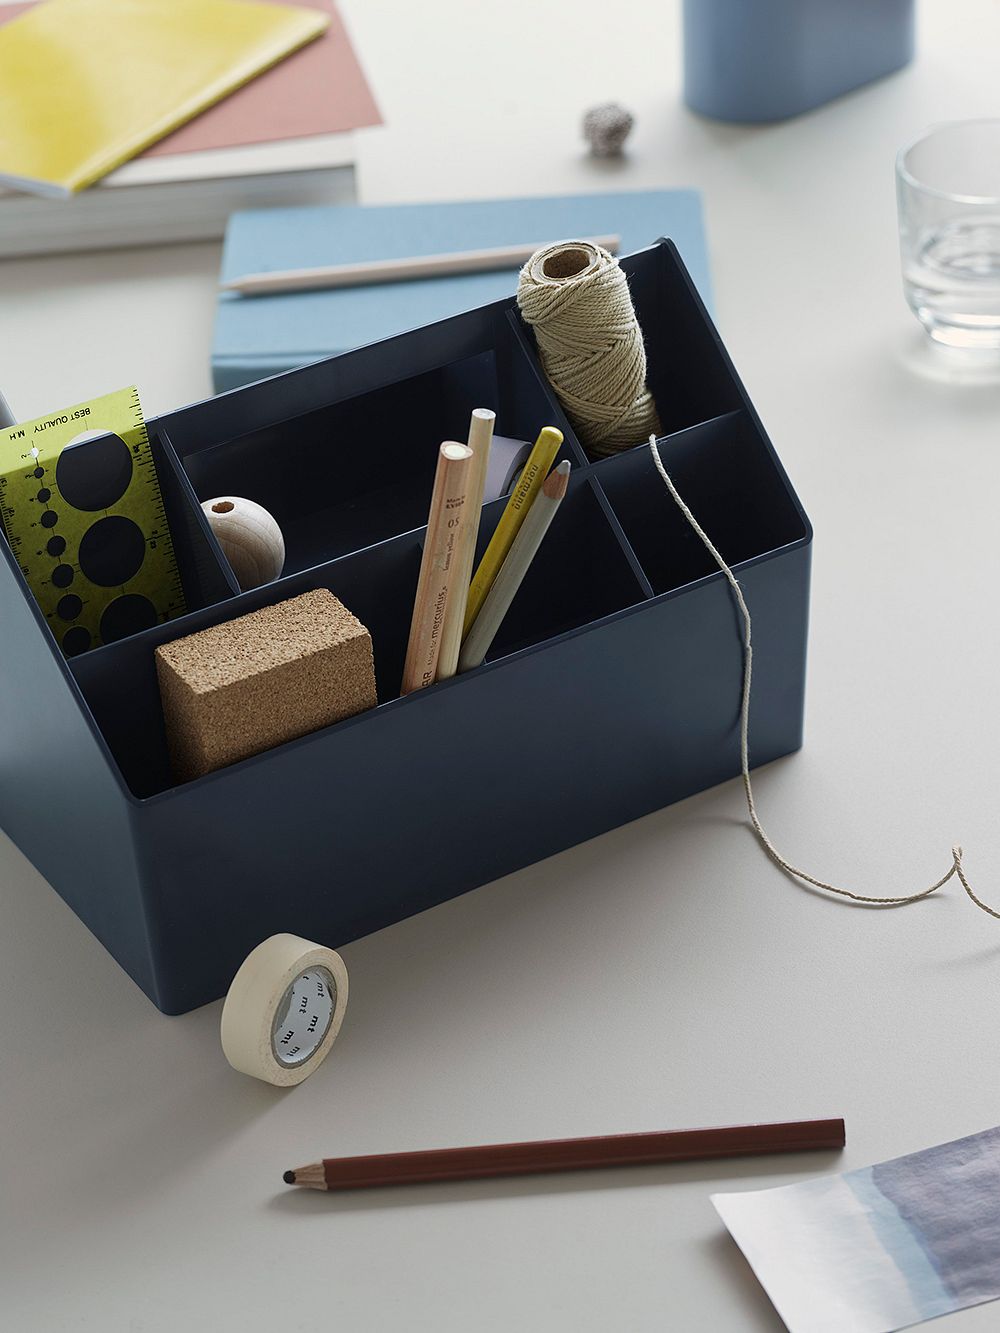 An image of Muuto's toolbox filled with office supplies.